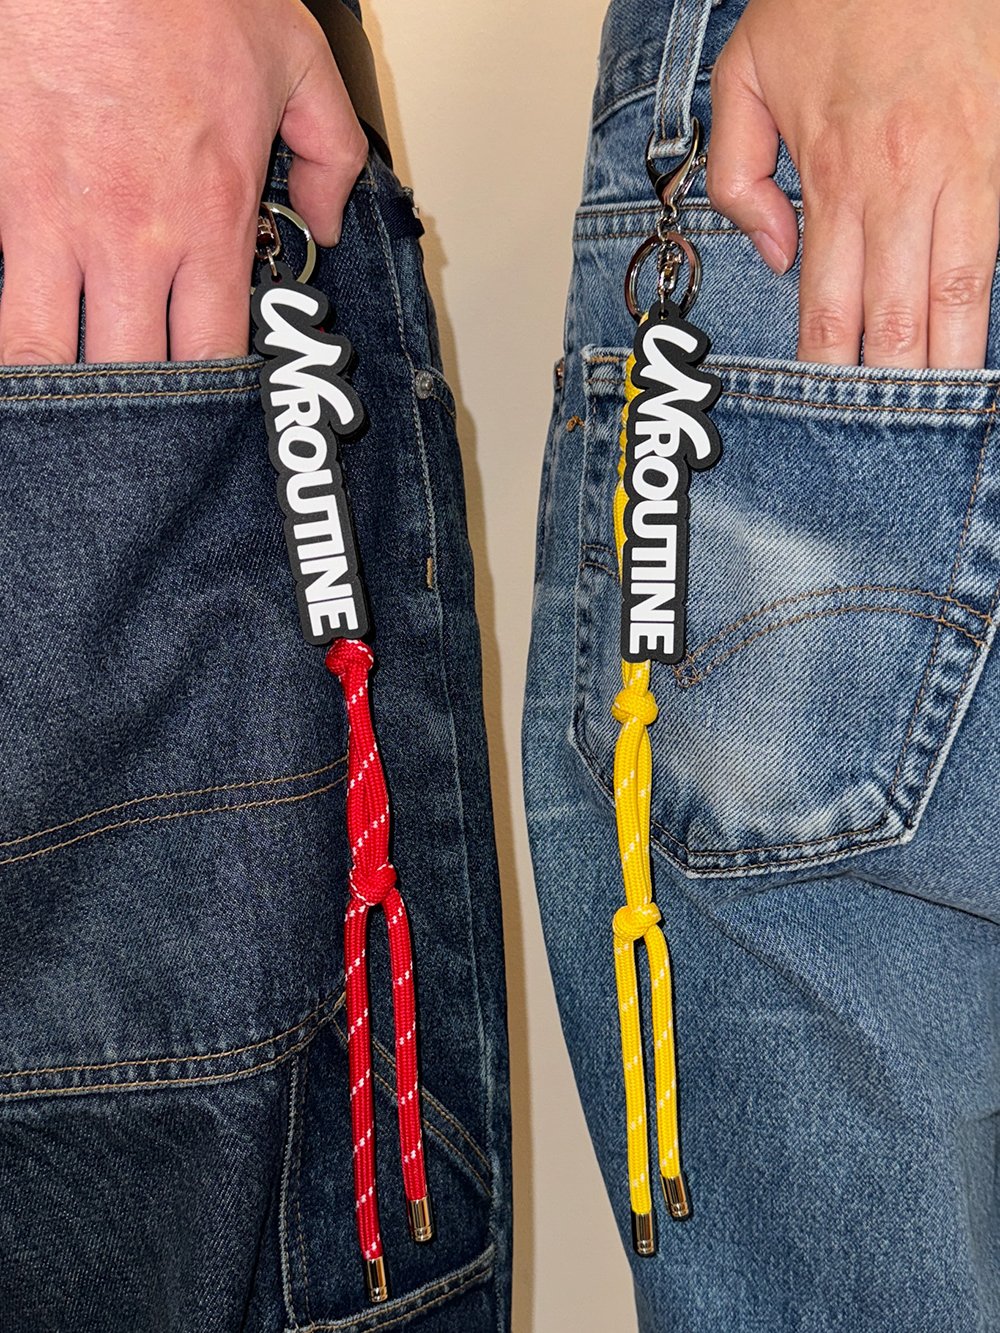 Unroutine Rope Keychain / 6color